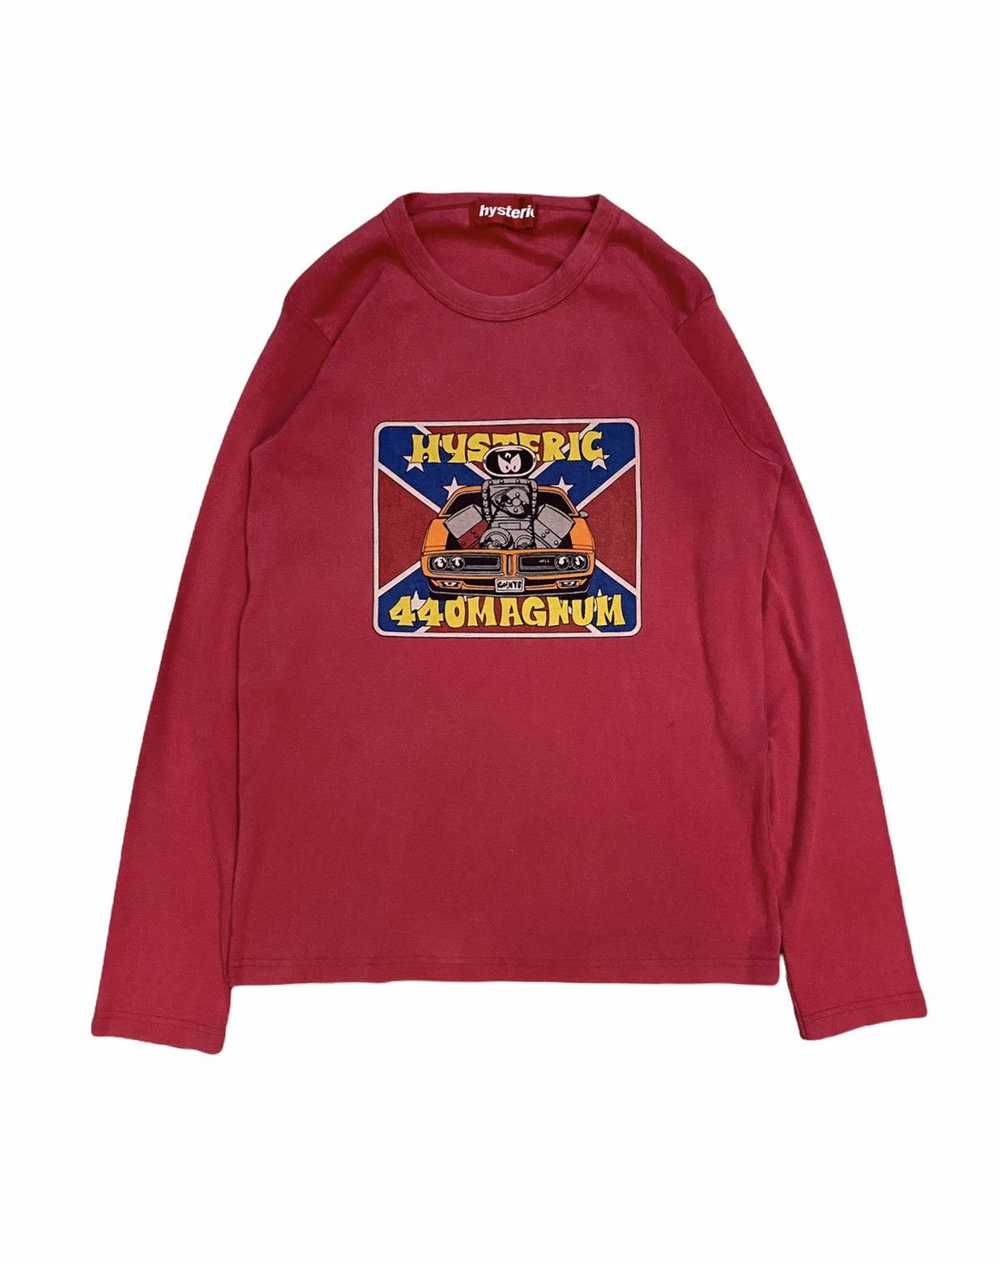 Hysteric Glamour 90s HG 440 Magnum LS - image 1